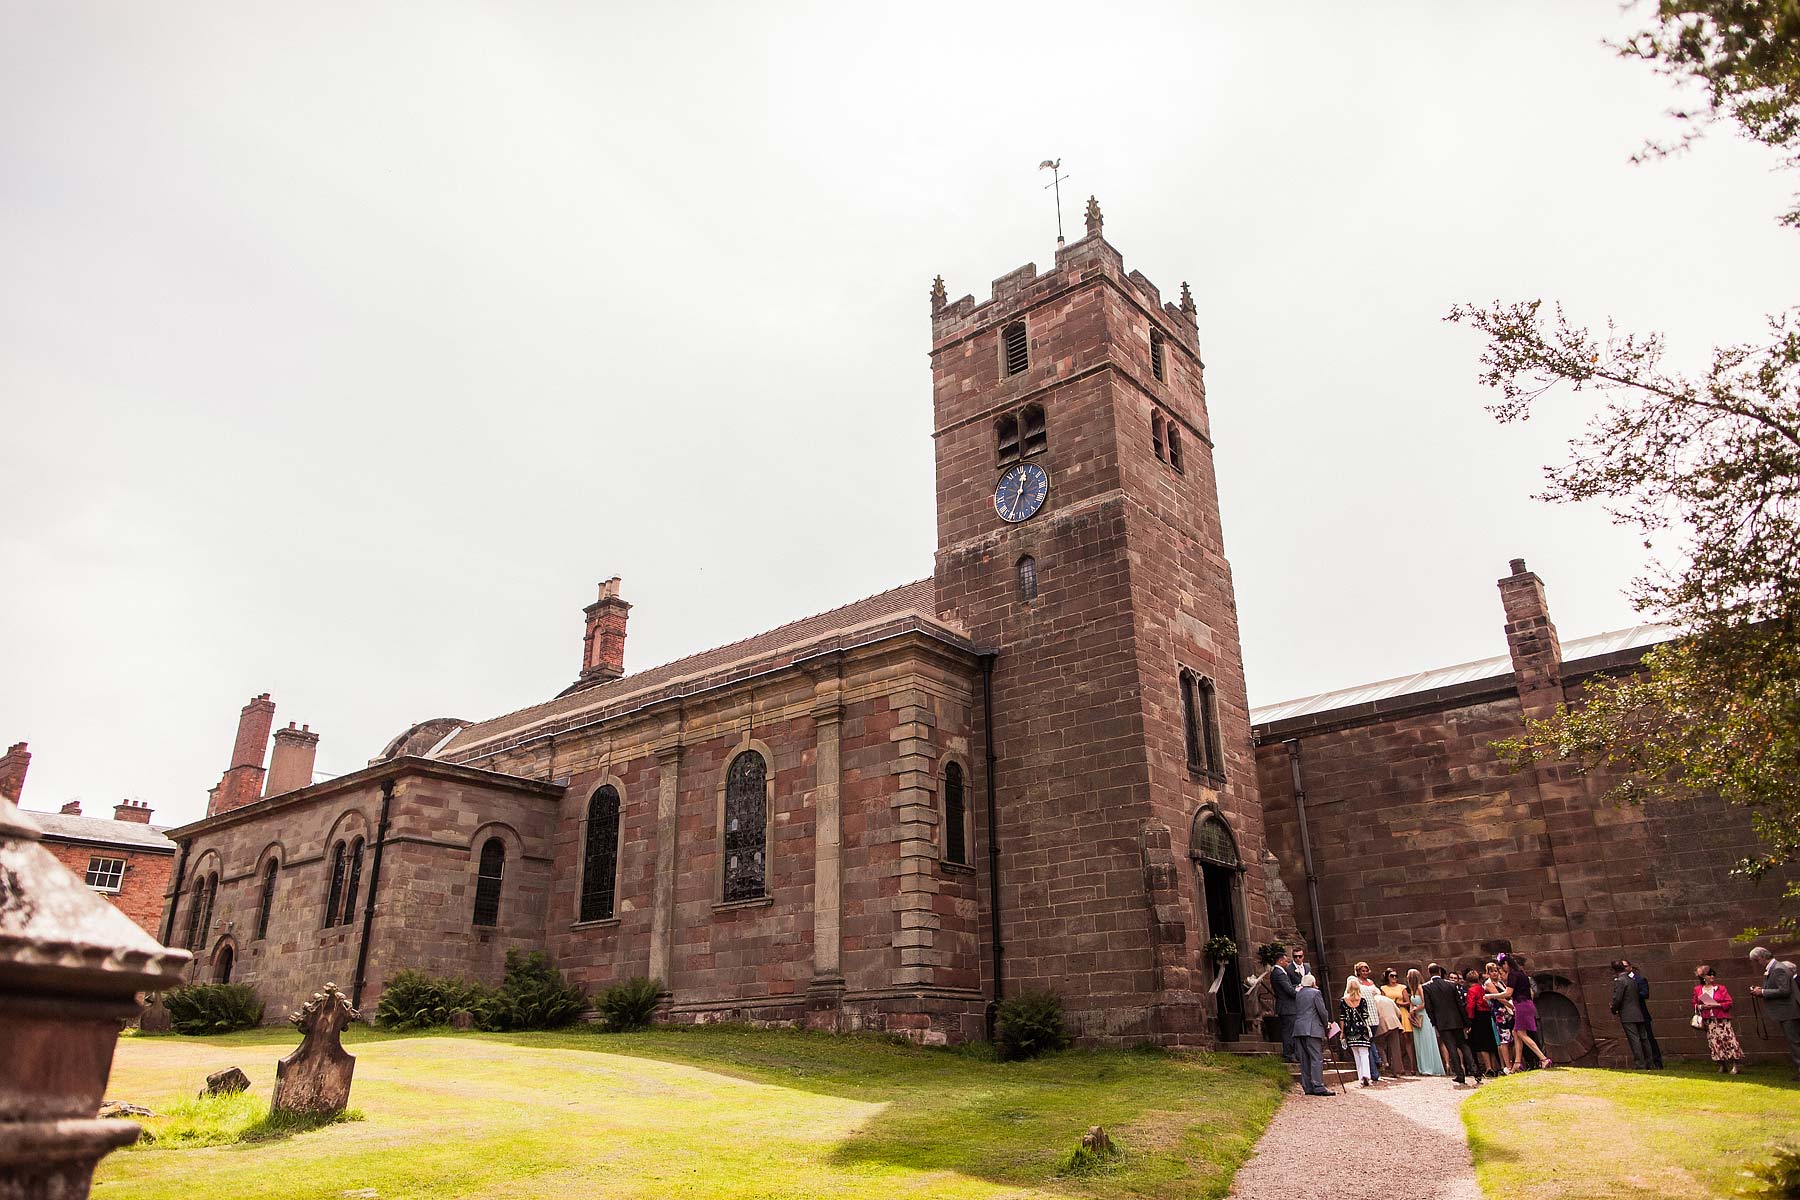 Wedding at St Andrews Church at Weston Park in Staffordshire by Reportage Wedding Photographer Stuart James